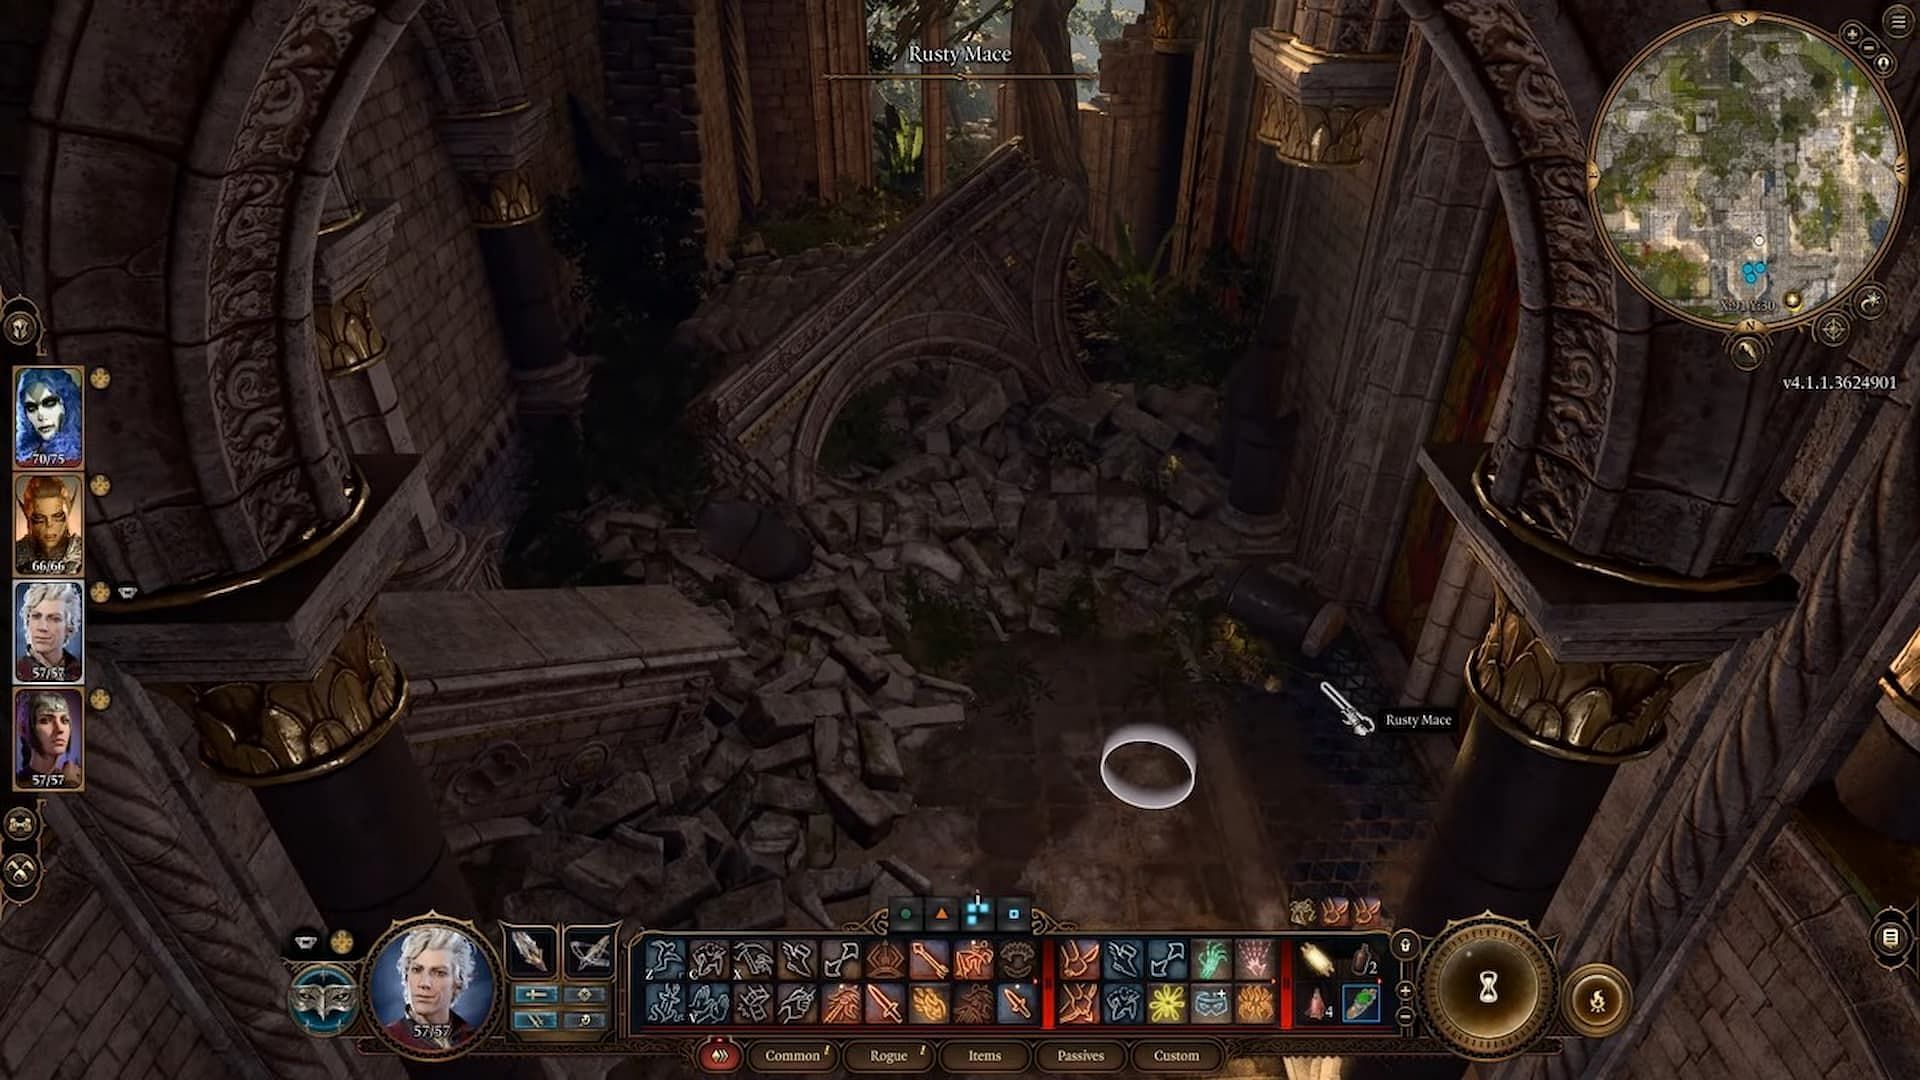 Find the Rusty Mace on the ground (Image via Larian Studios)